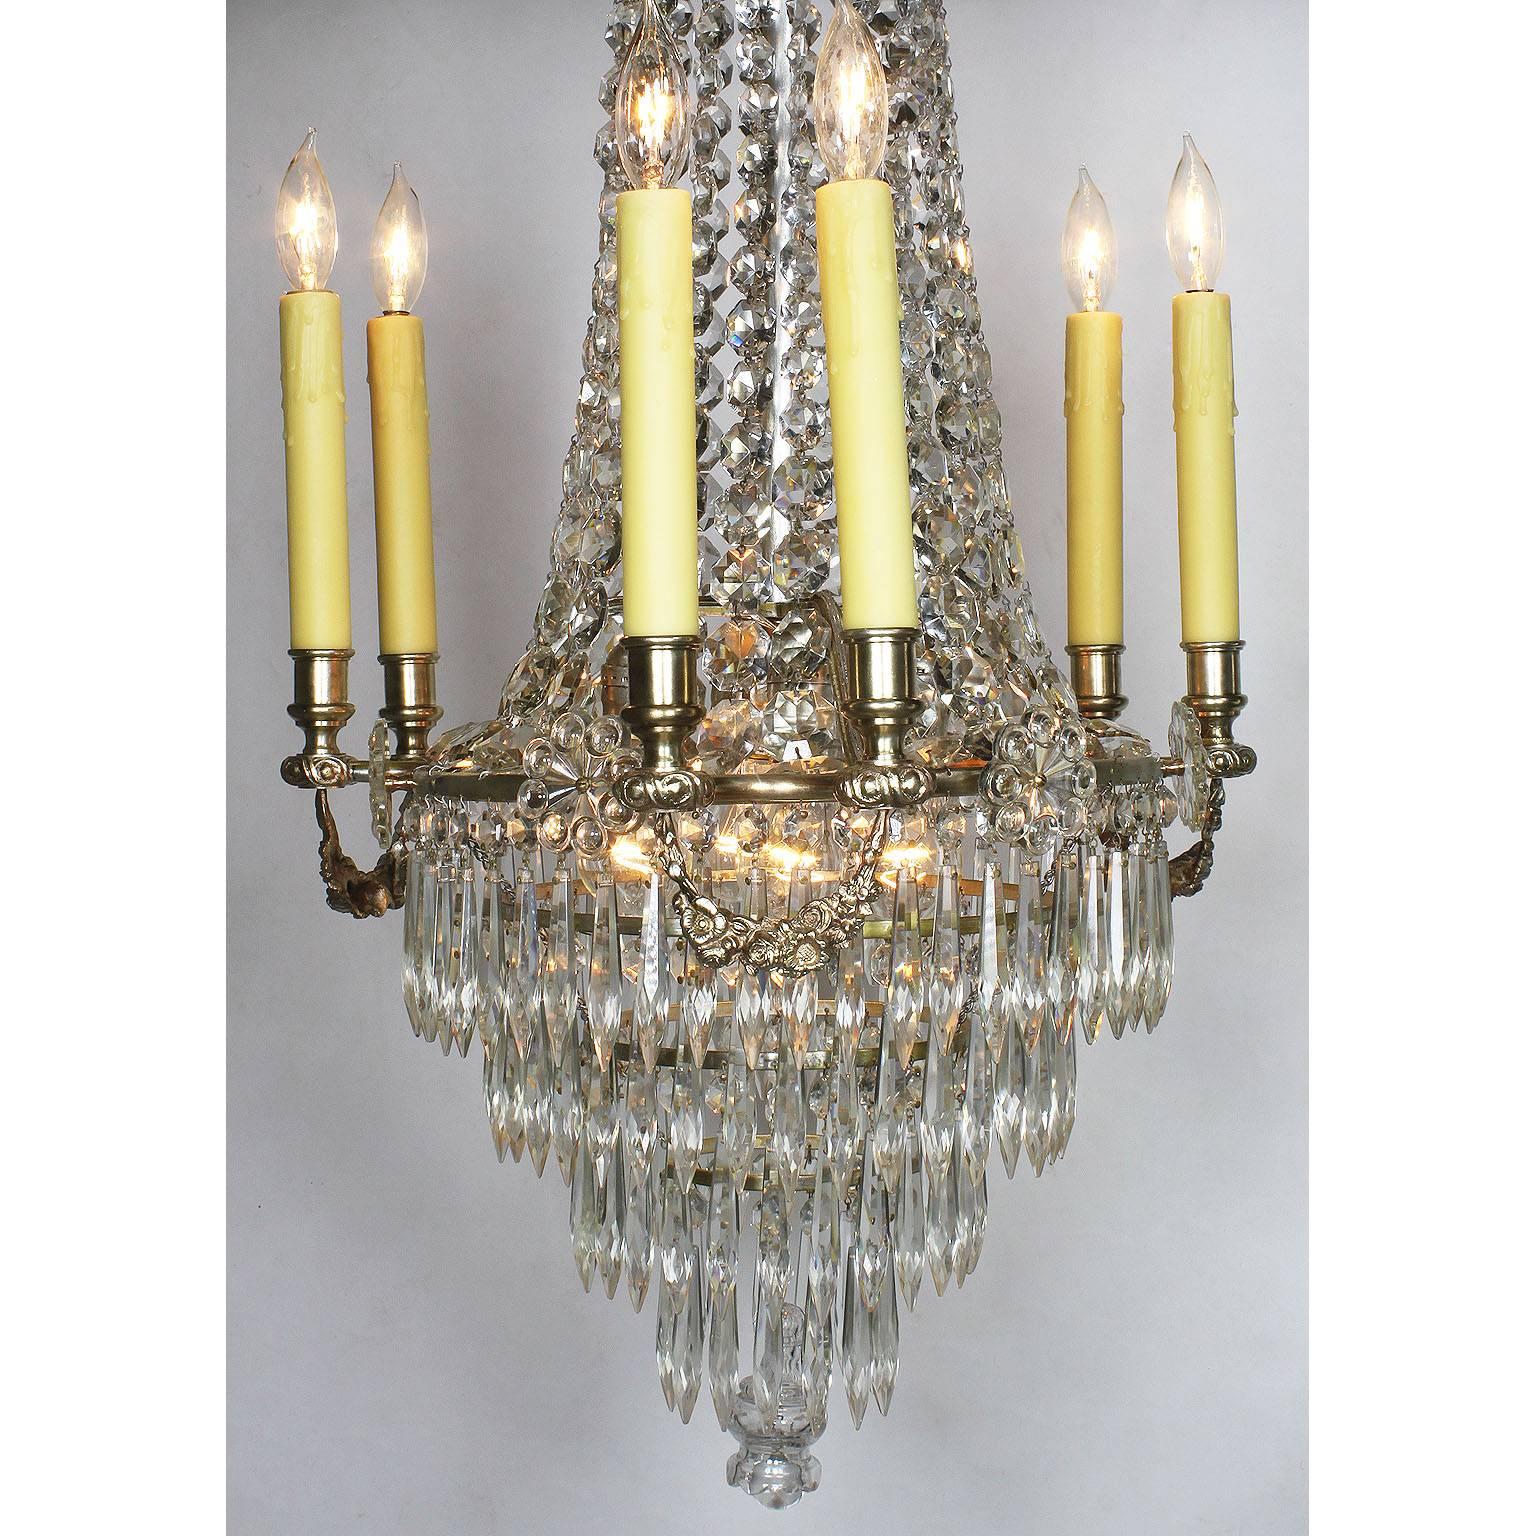 Early 20th Century French 19th-20th Century Louis XVI Style Silvered Bronze & Cut-Glass Chandelier For Sale